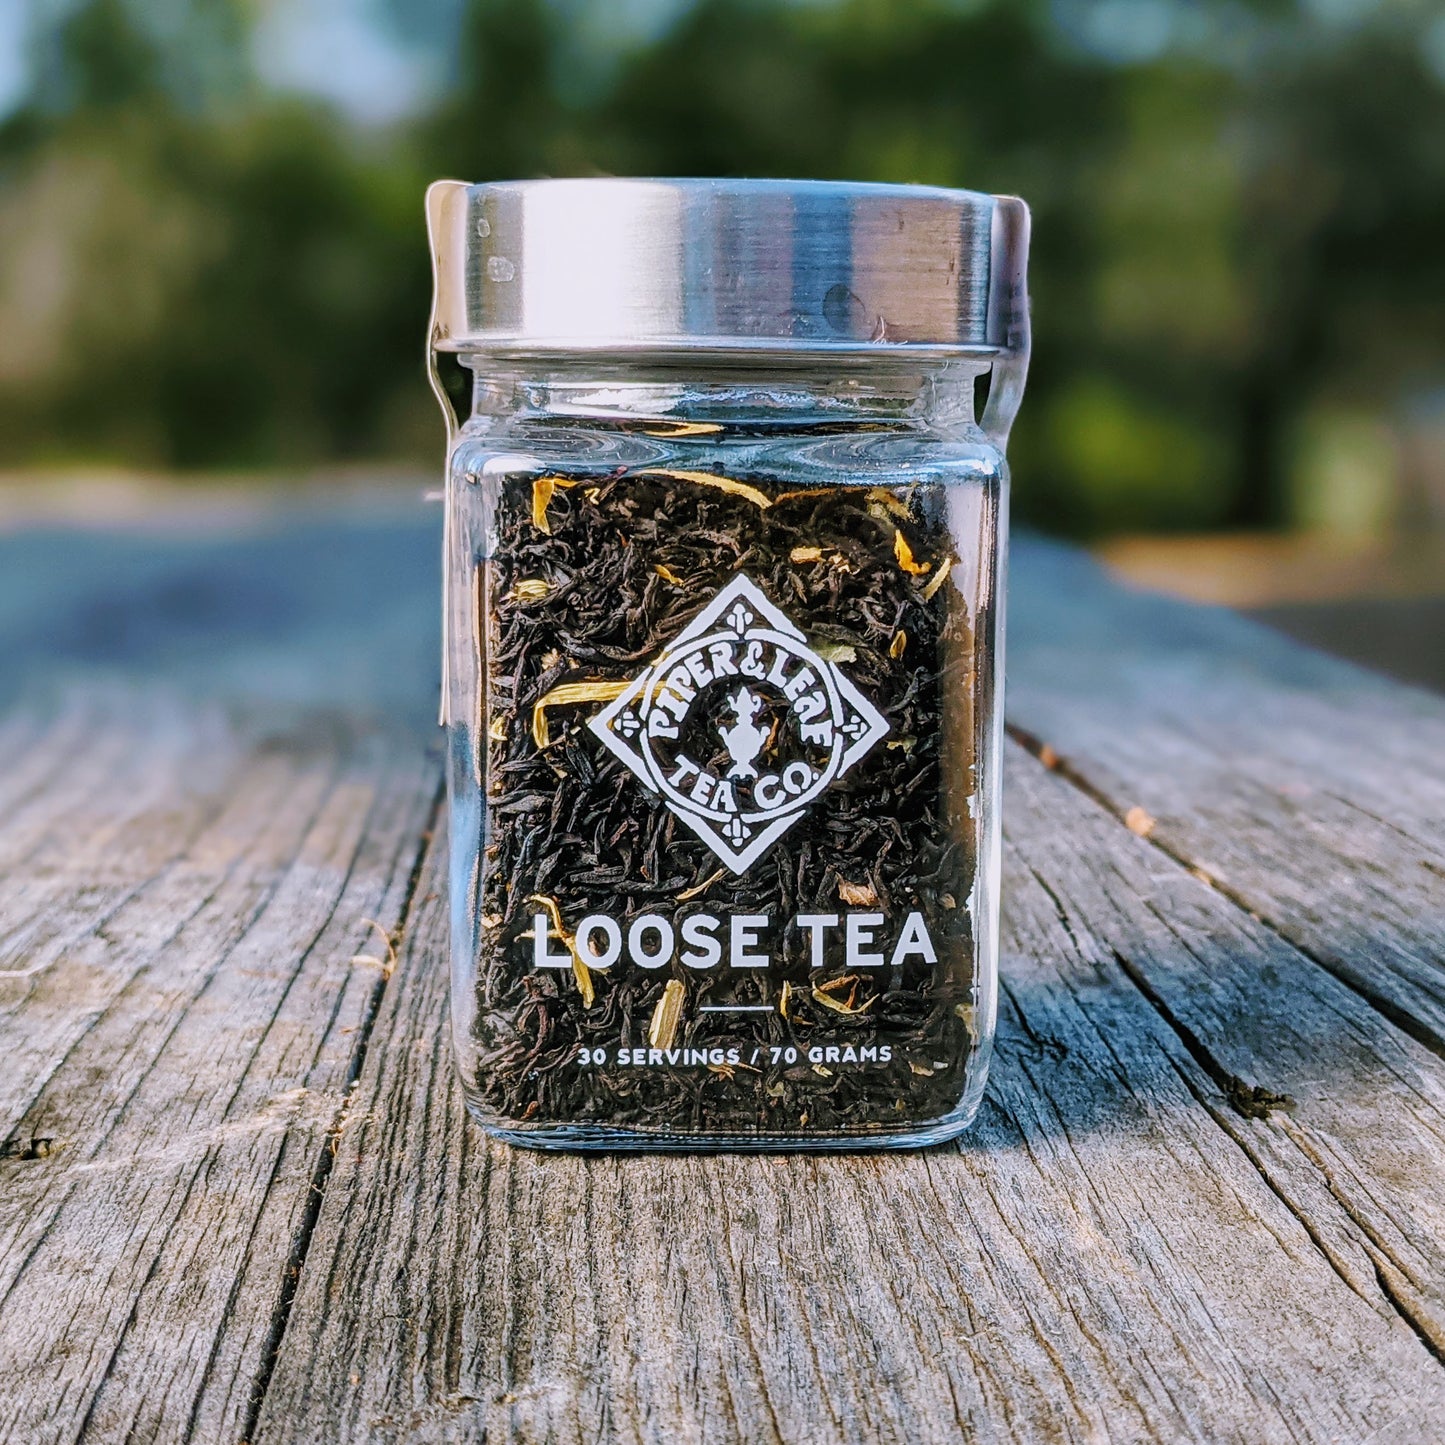 Monks Meditation Glass Jar of Loose Leaf Tea - 30 Servings filled with loose catnip leaves on a wooden surface outdoors from Piper & Leaf Tea Co.